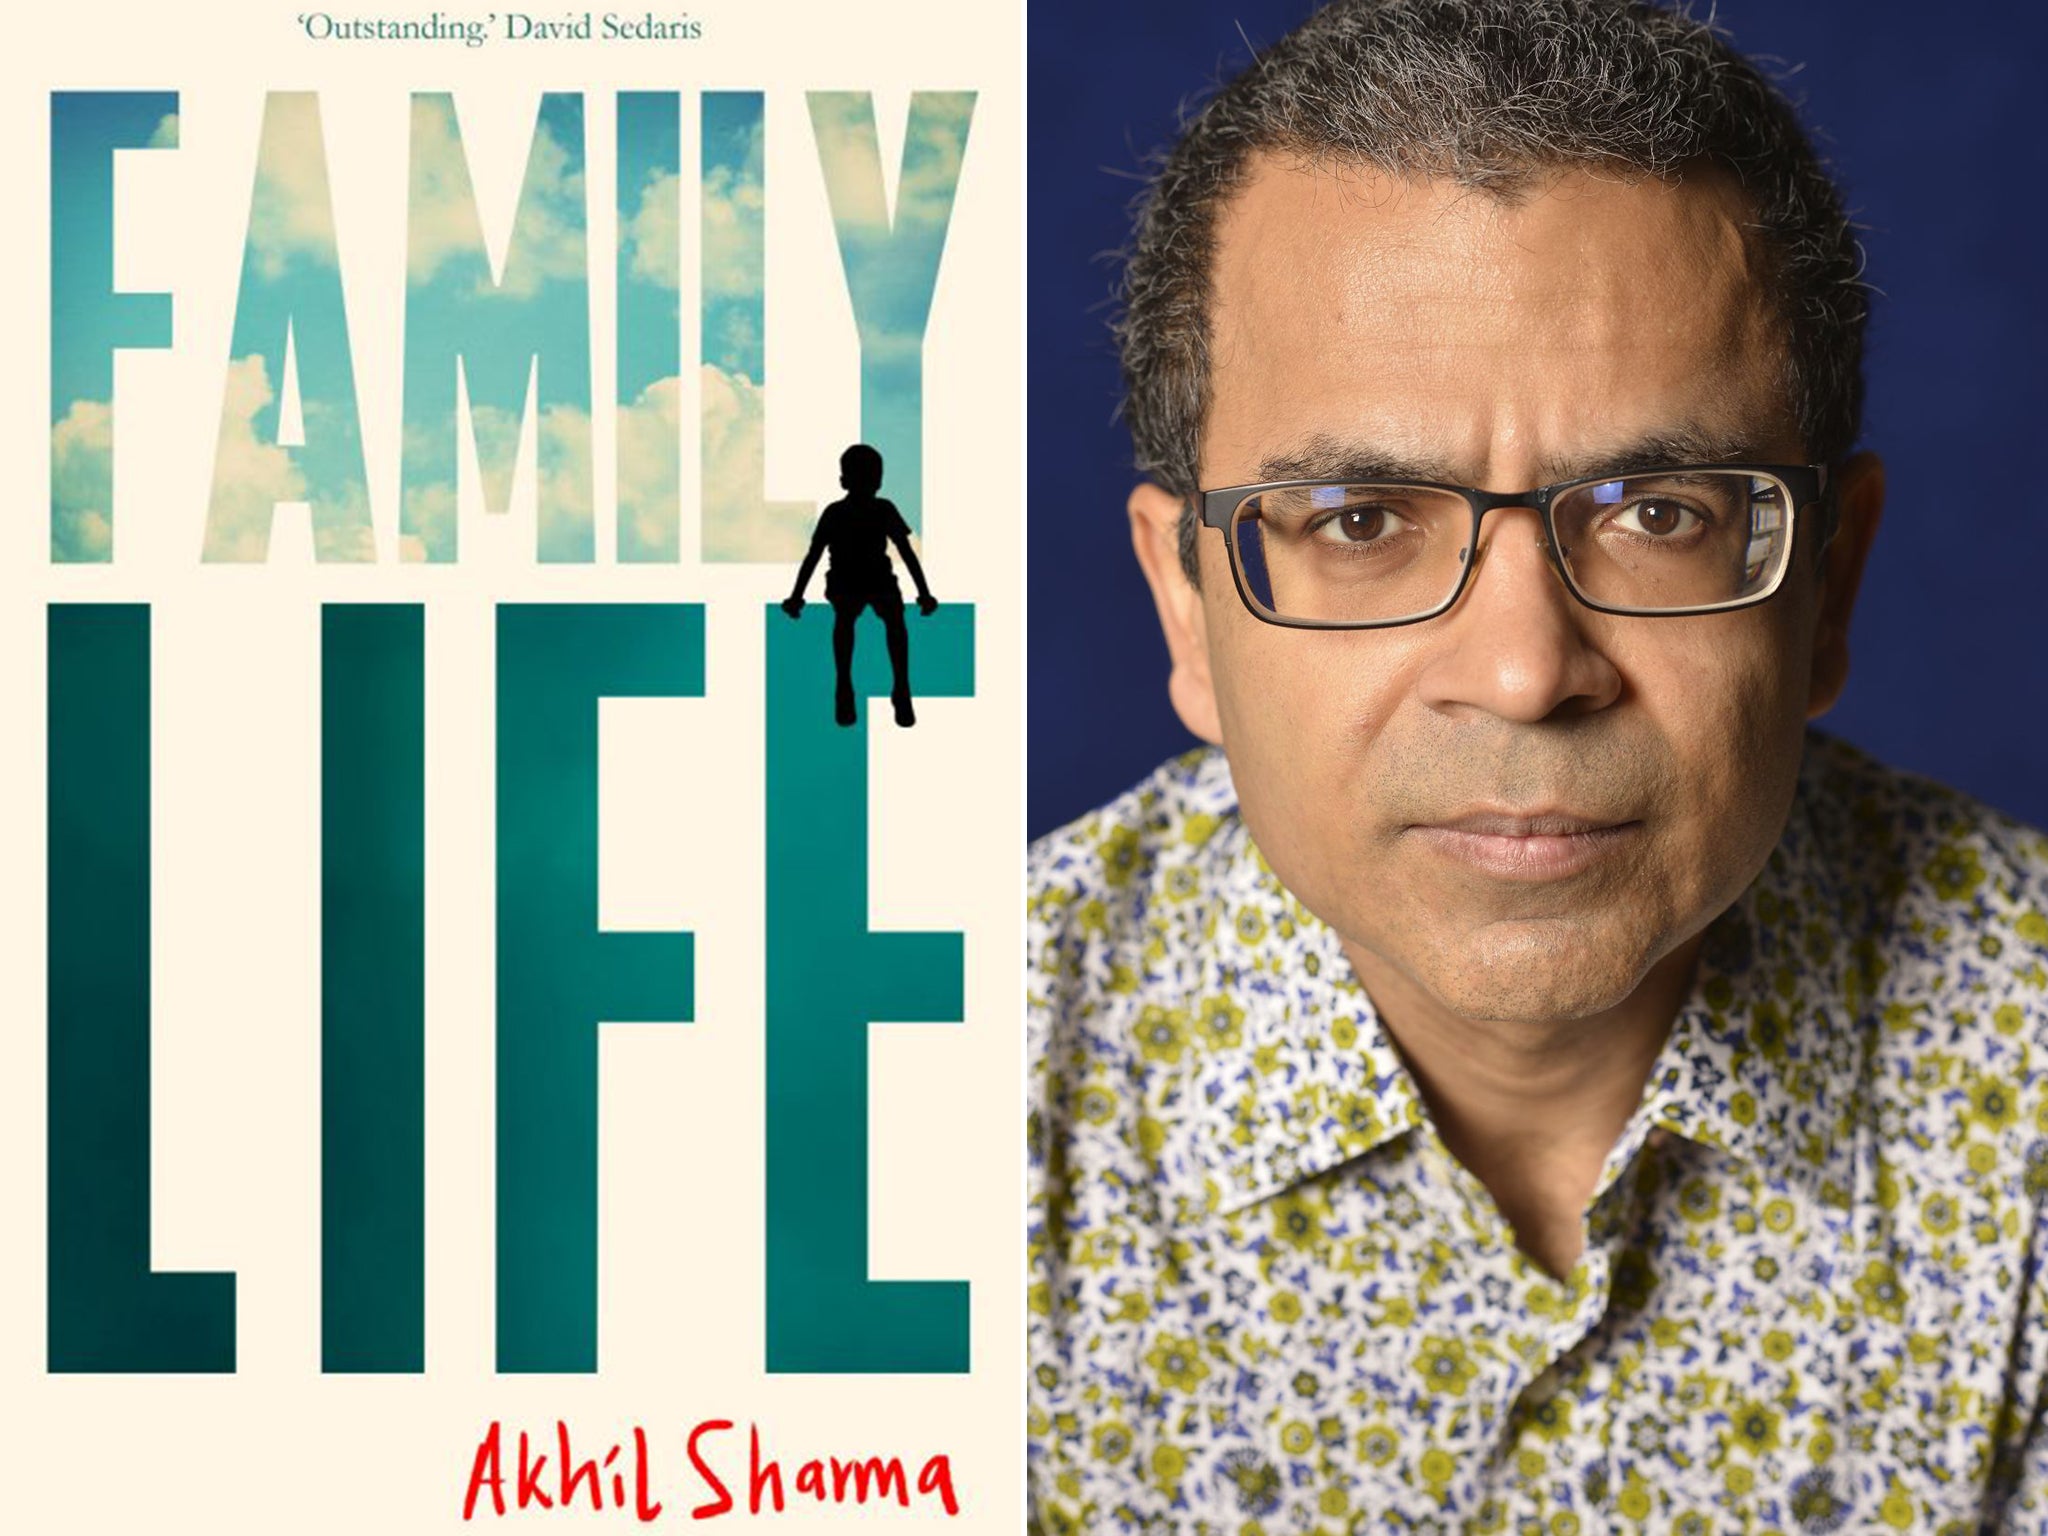 Akhil Sharma took 13 years to write the book, a process which he said had shattered his youth